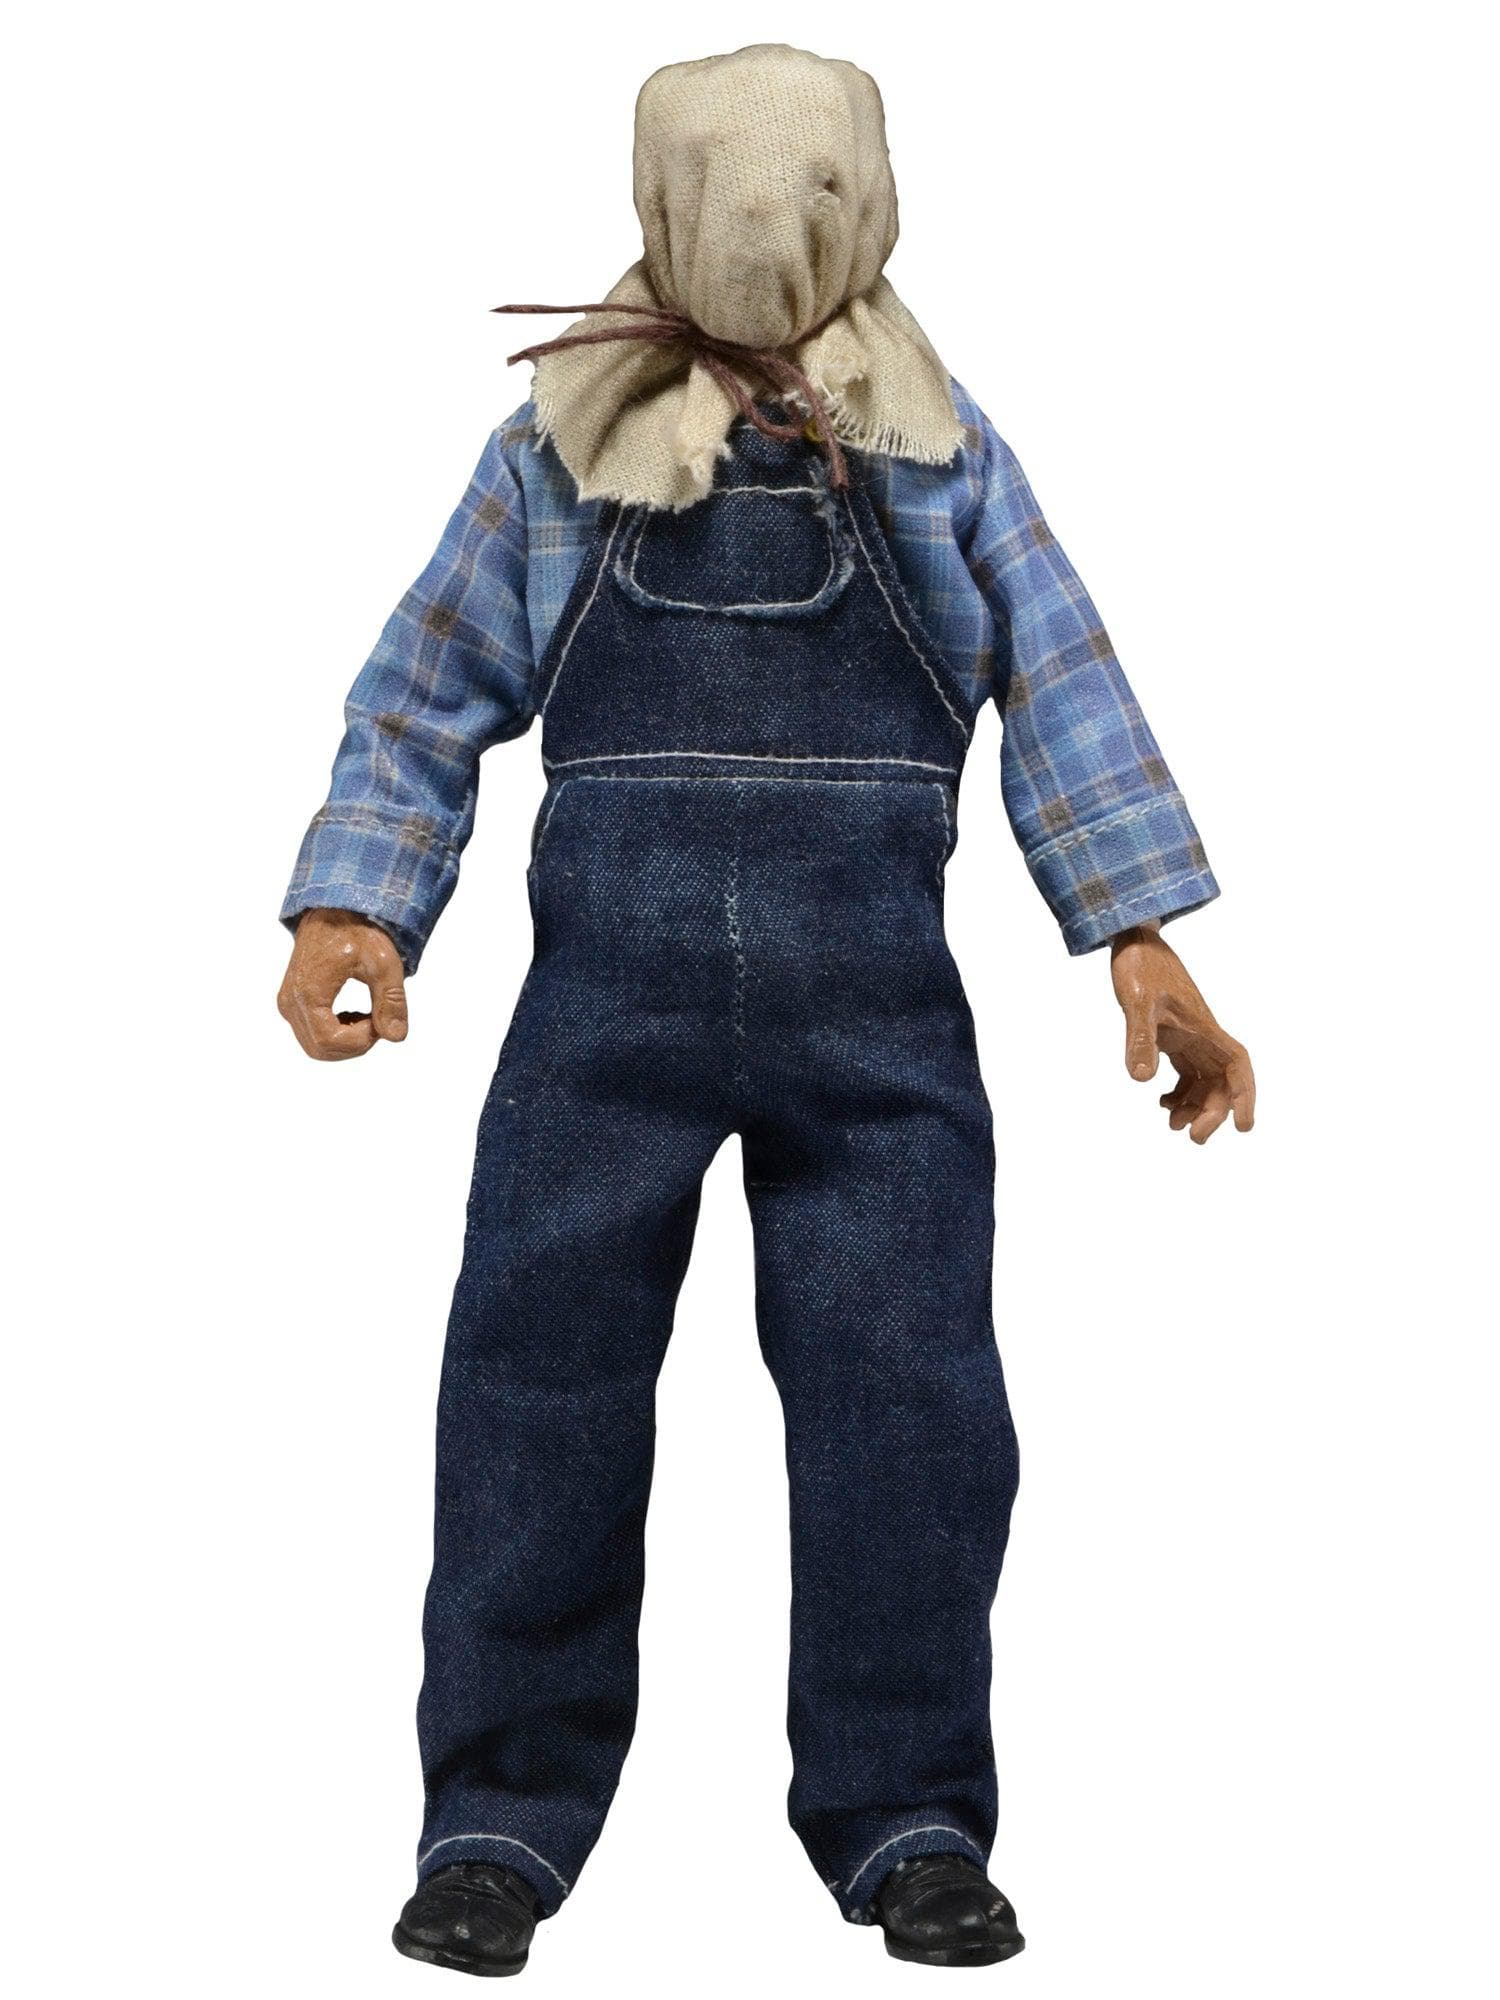 NECA - Friday the 13th - 8" Clothed Figure - Jason Part 2 - costumes.com